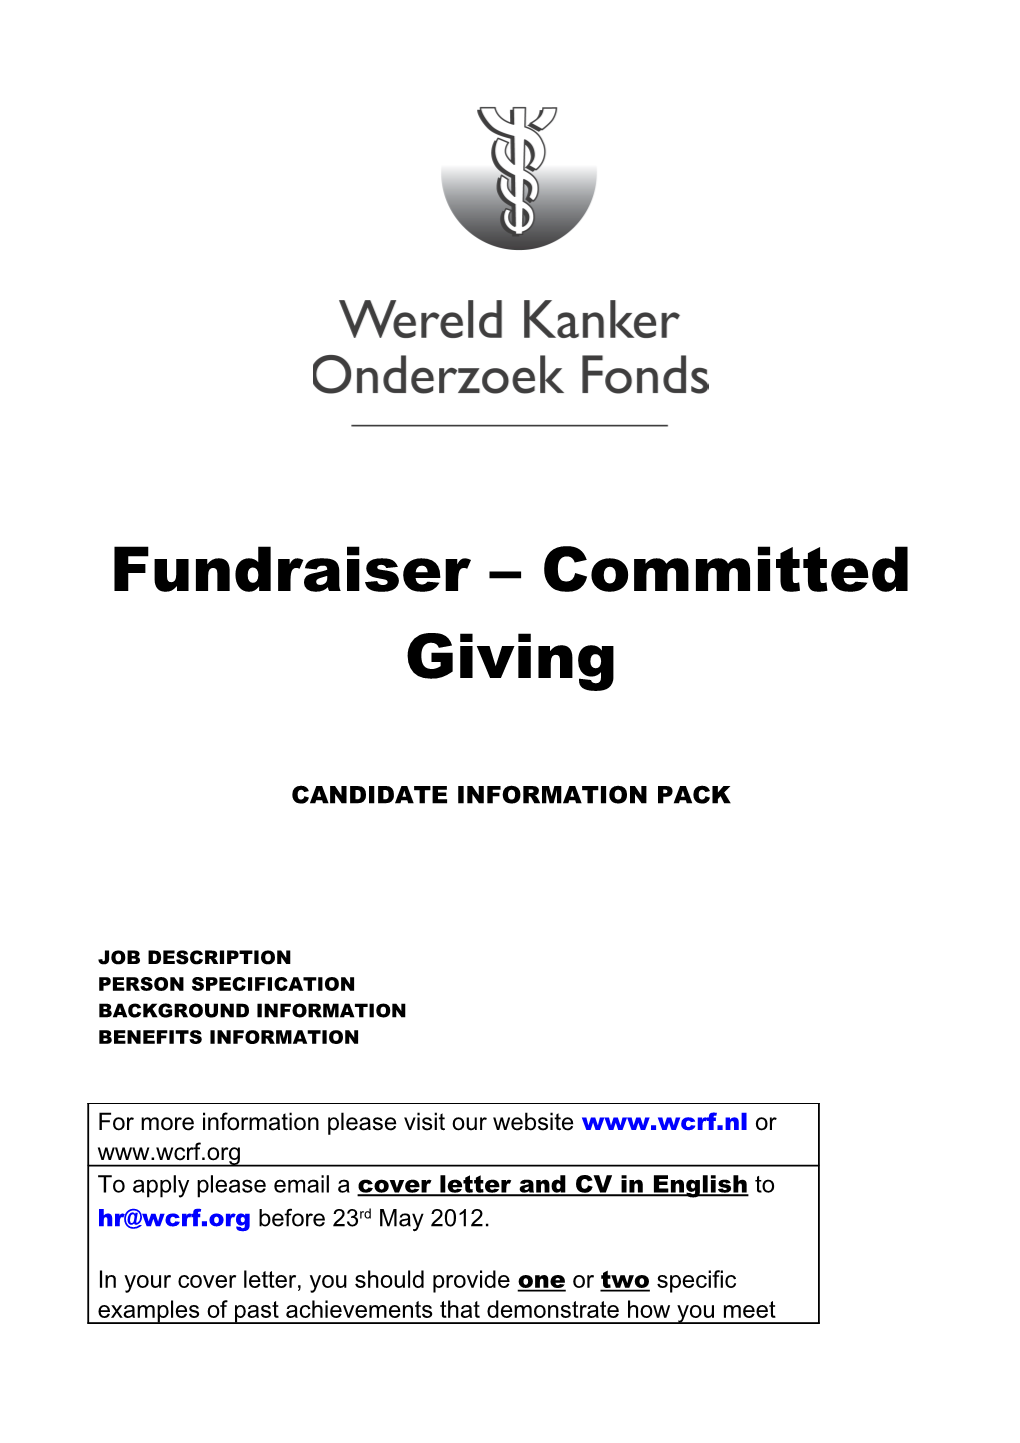 World Cancer Research Fund Netherlands (WCRF NL)